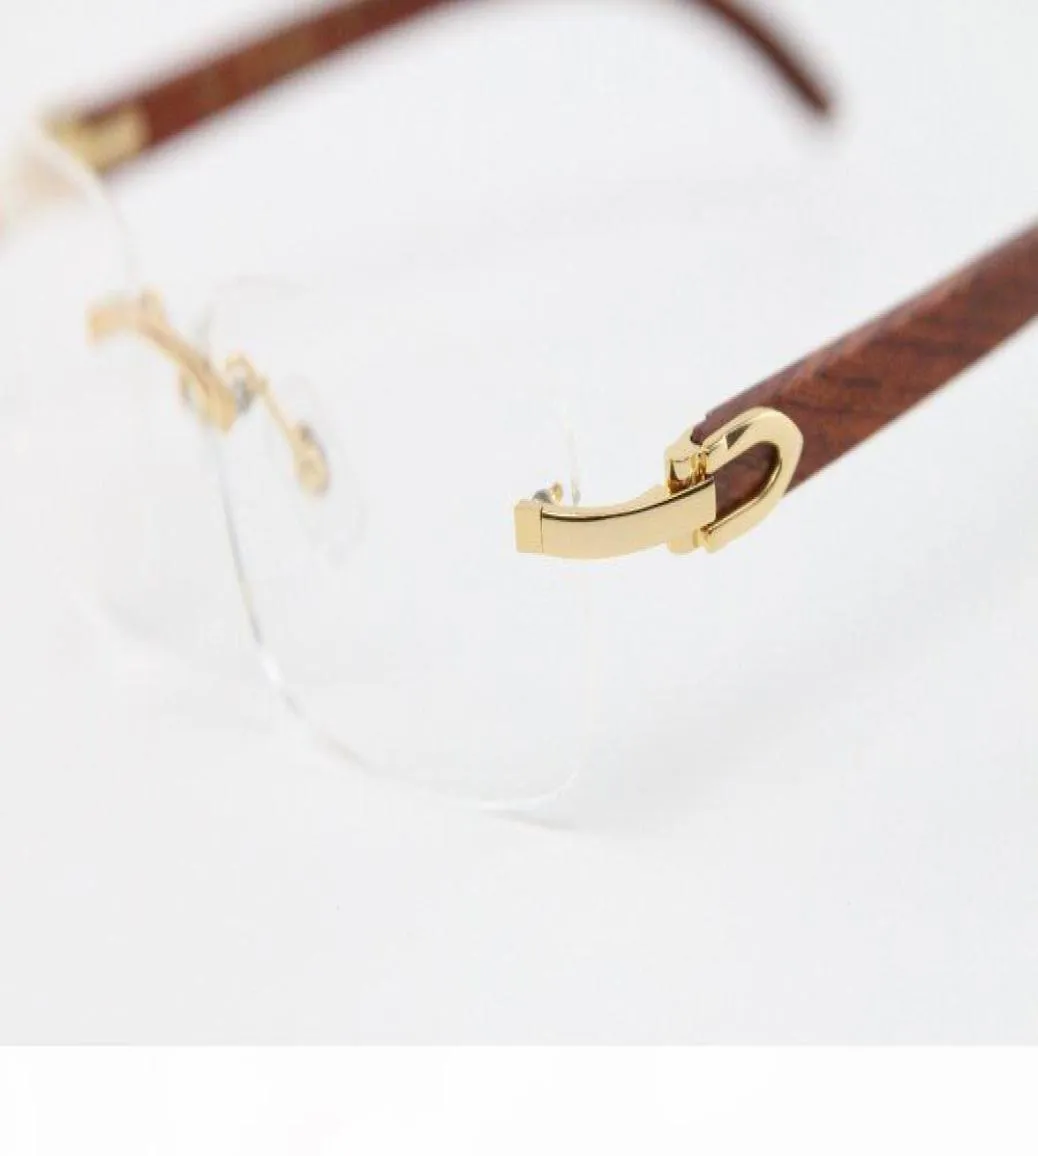 2020 New Style Wood Eyeglasses Unisex for Woman 8200757 Silver Gold Metal Frame Rimless C Decoration Gold 프레임 안경 크기 568587338